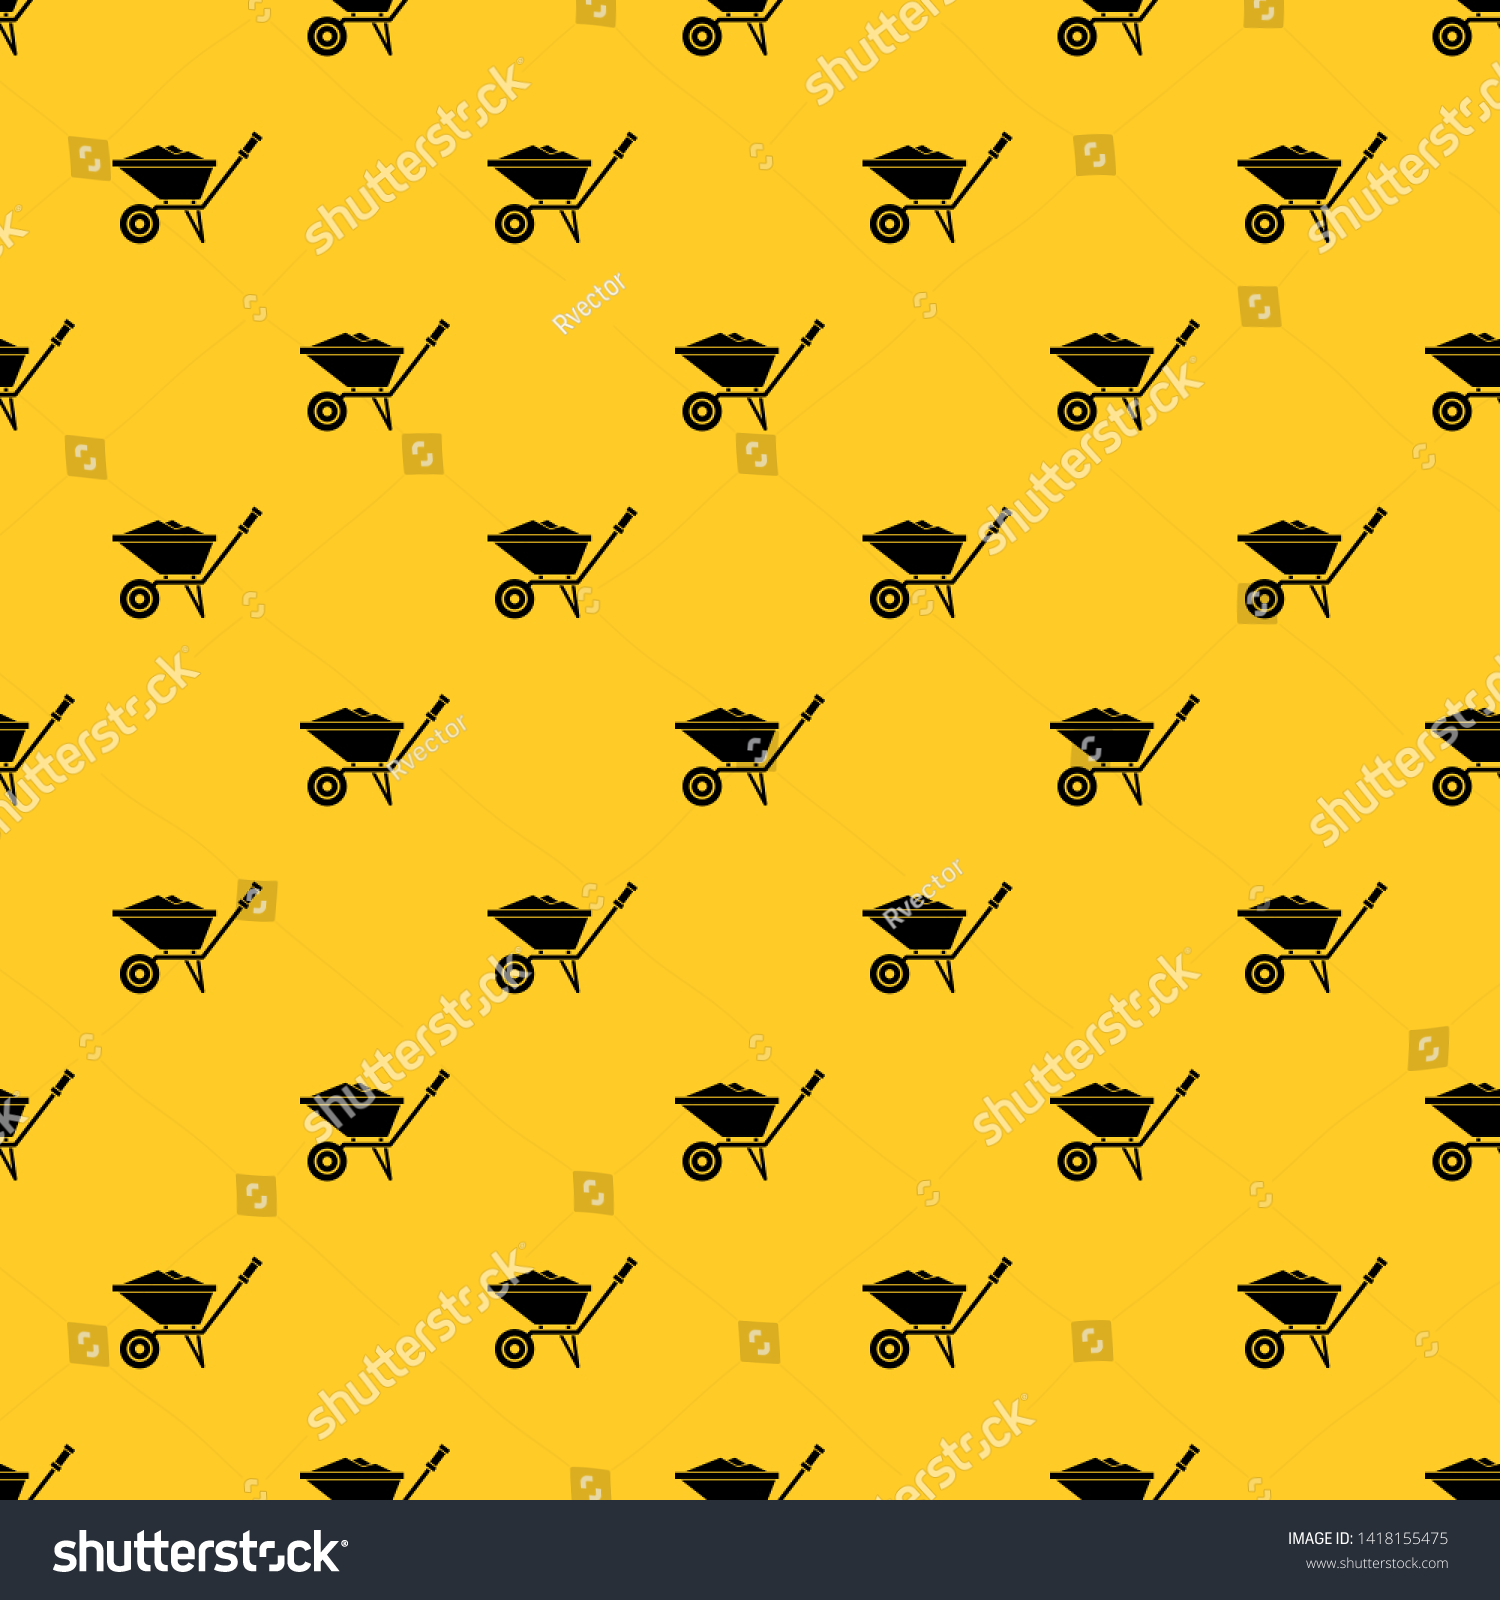 SVG of Wheelbarrow pattern seamless vector repeat geometric yellow for any design svg